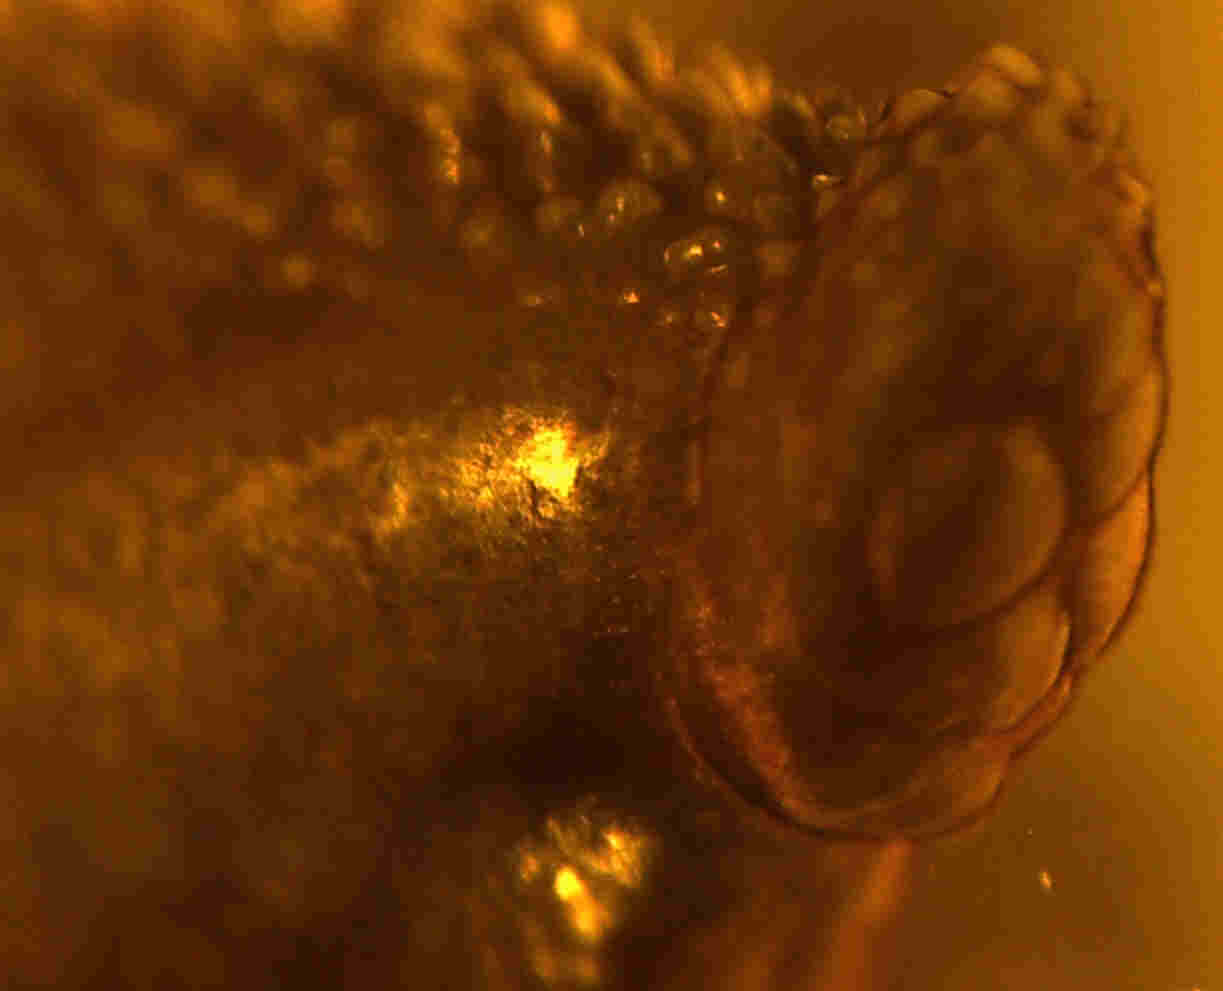 Leech in amber offers chance of discovering dinosaur DNA